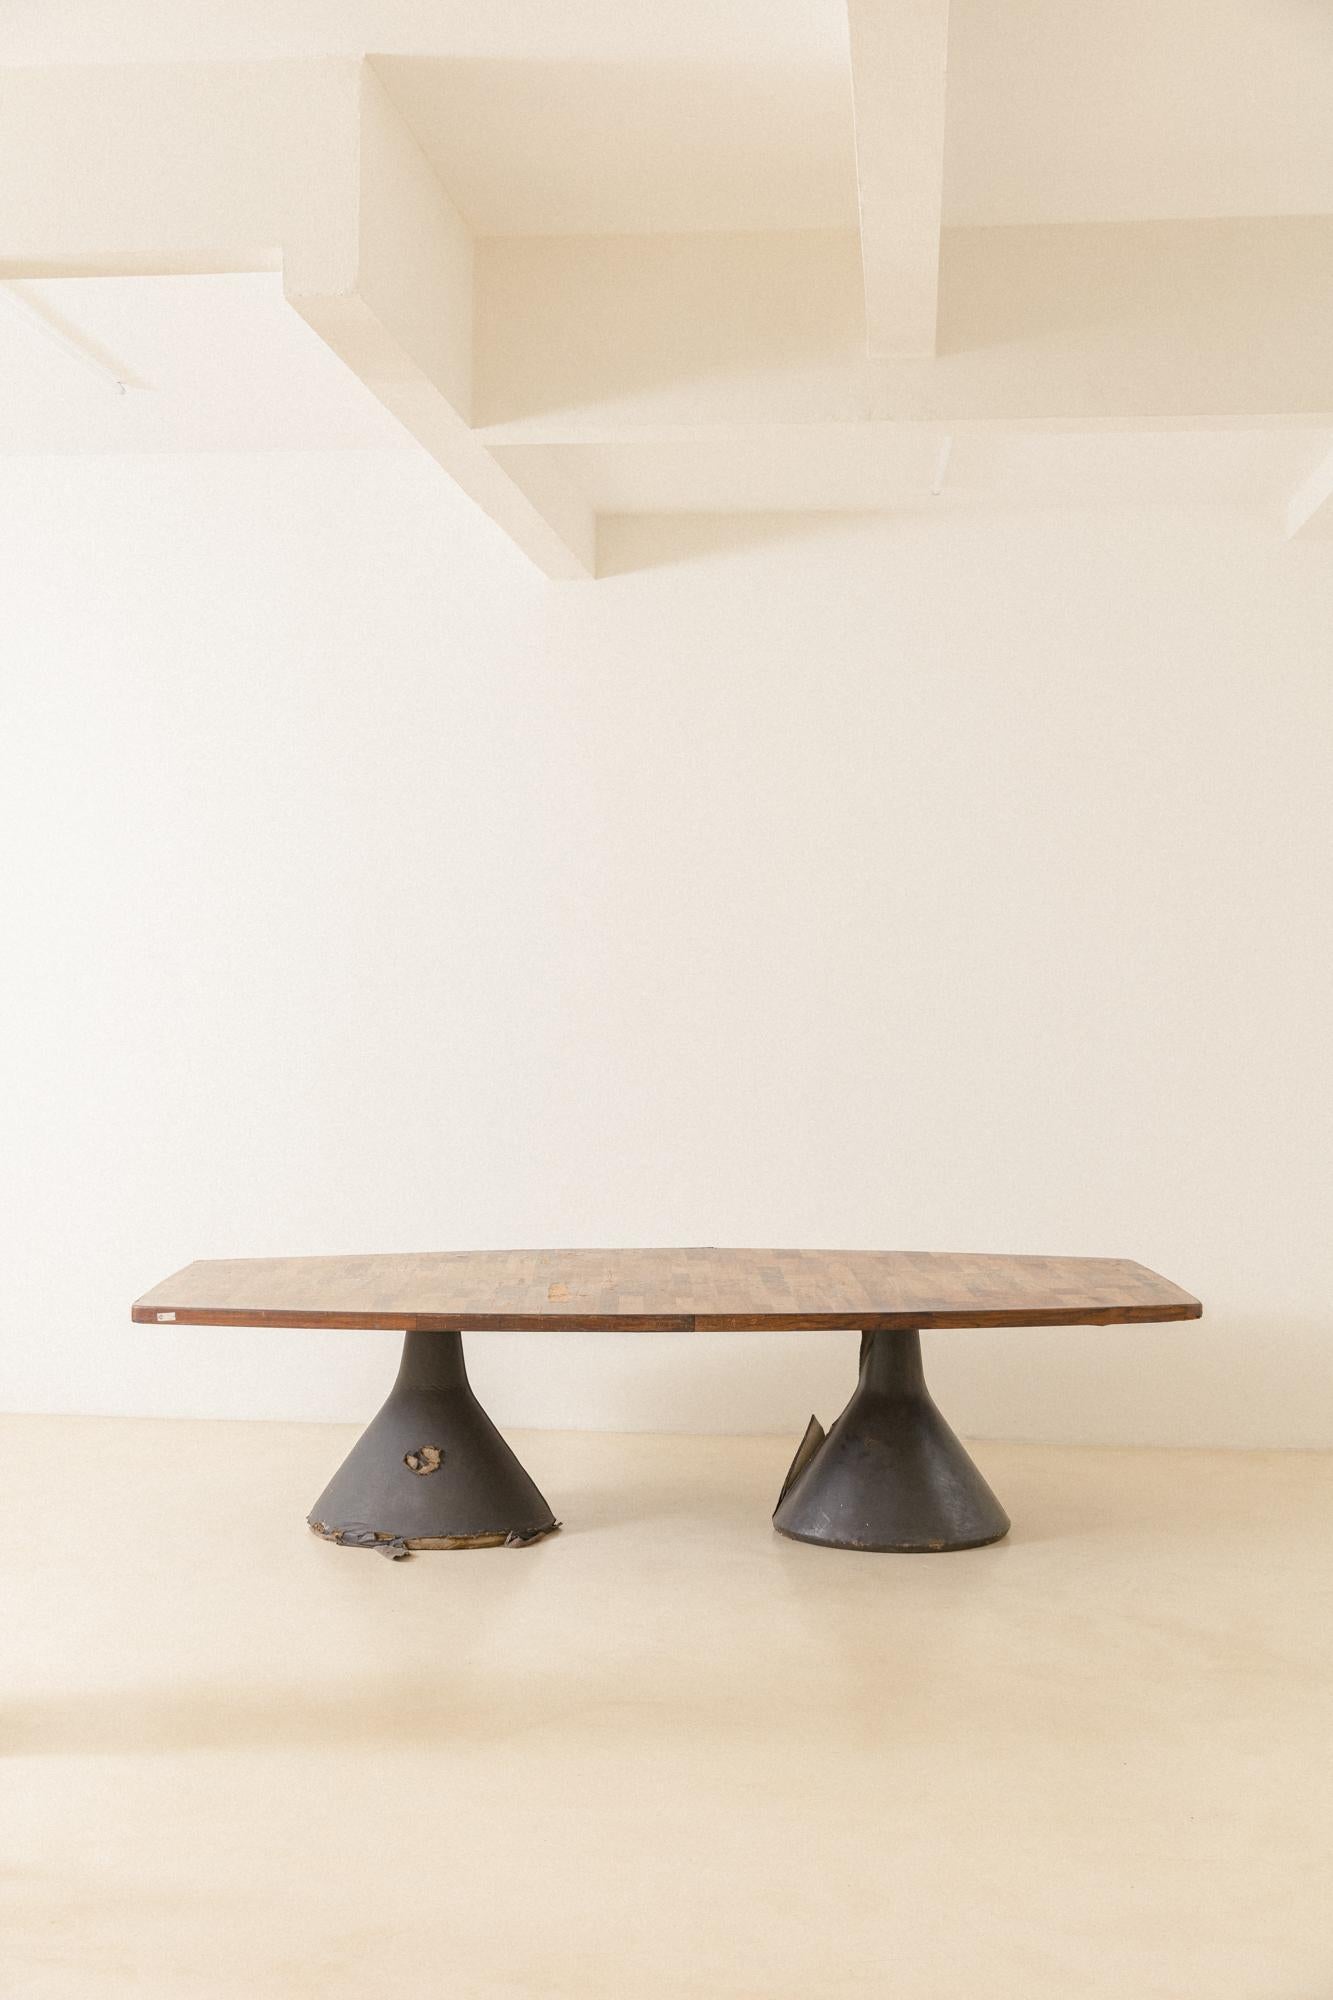 The iconic Guanabara is a table designed by Jorge Zalszupin (1922-2020) in 1959 and produced by his company, L'atelier. A long rosewood patchwork top rests over two concrete bases finished with black leather.

This patchwork solution is present in